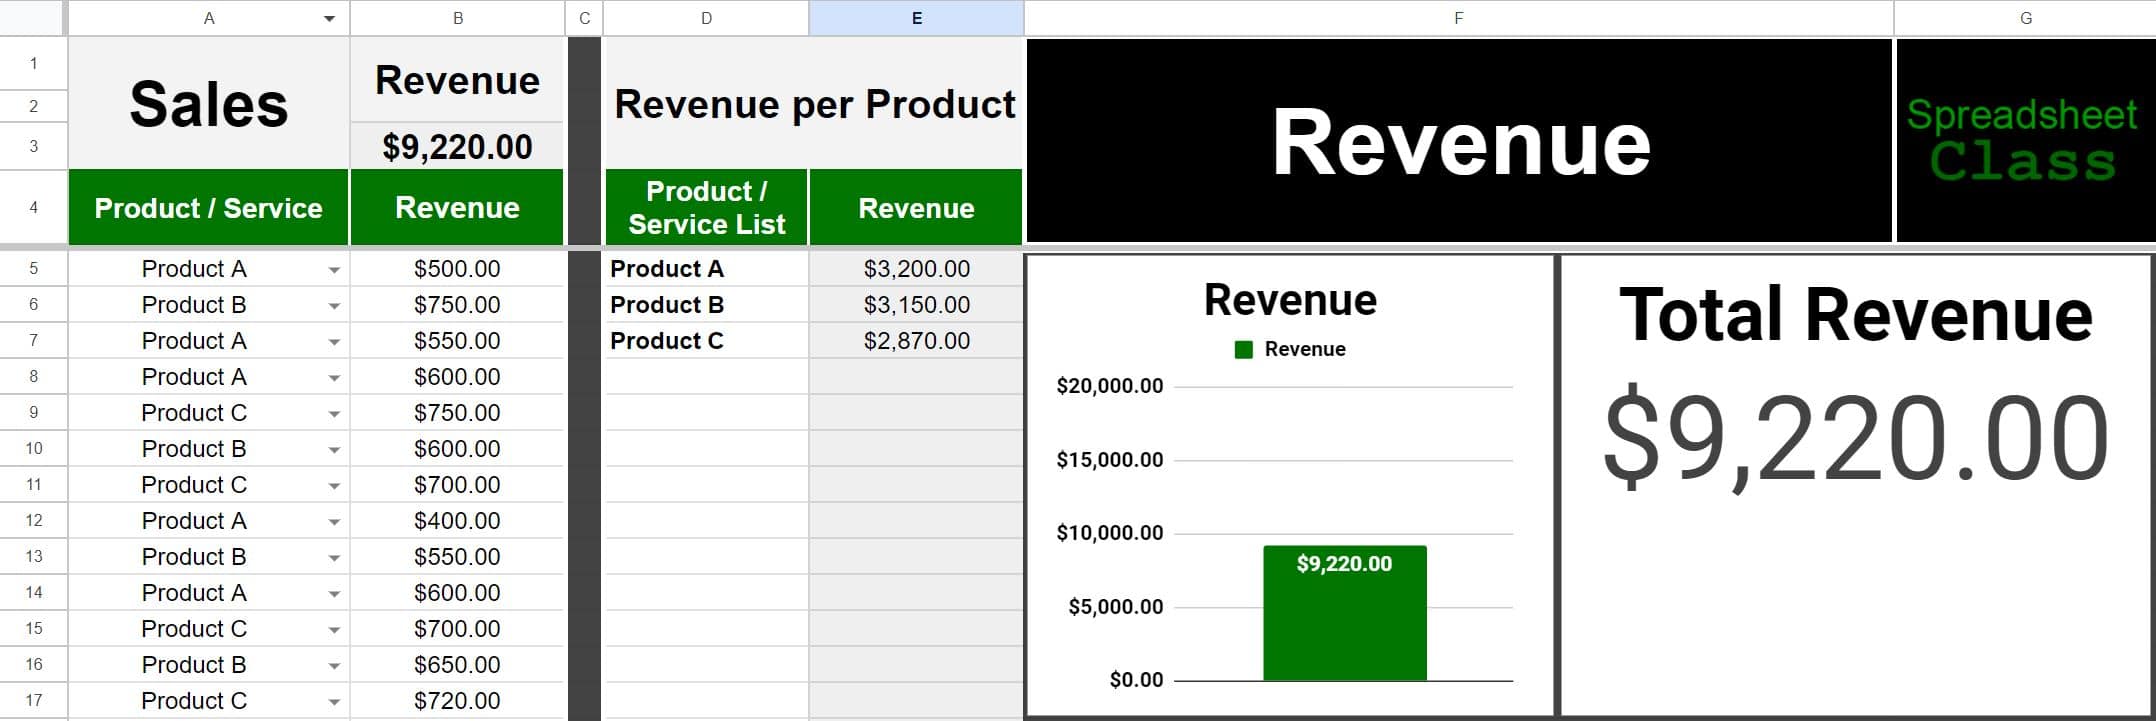 Linking Image for the Sales template for Google Sheets